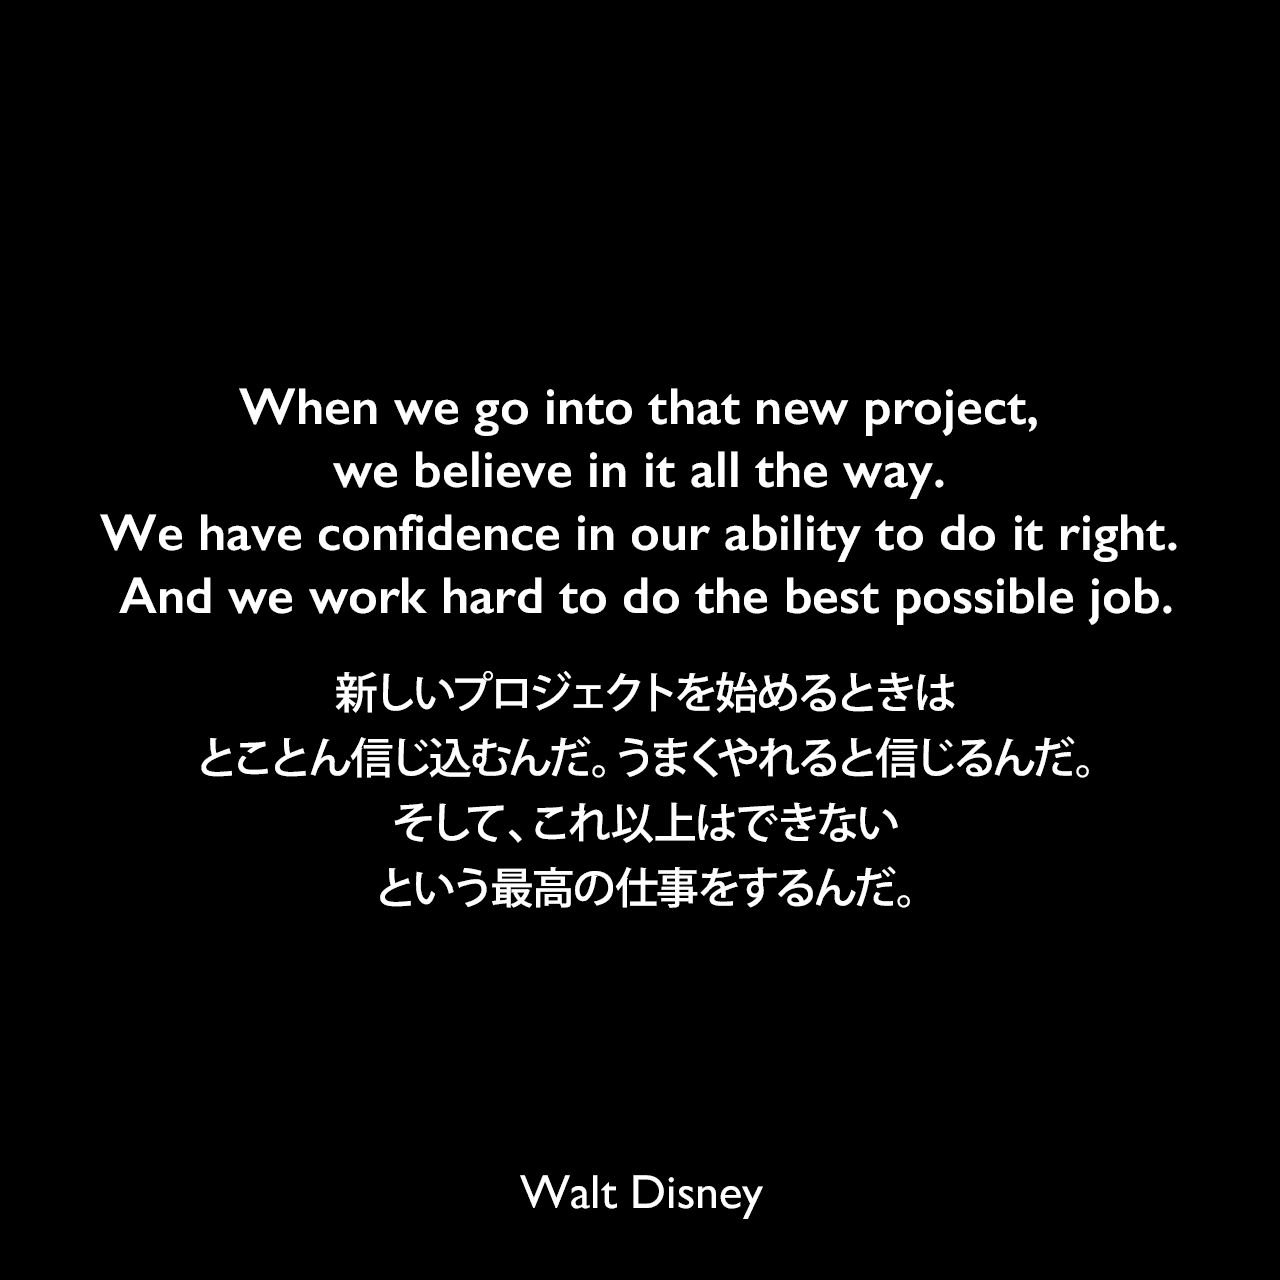 When we go into that new project, we believe in it all the way. We have confidence in our ability to do it right. And we work hard to do the best possible job.新しいプロジェクトを始めるときは、とことん信じ込むんだ。うまくやれると信じるんだ。そして、これ以上はできないという最高の仕事をするんだ。Walt Disney